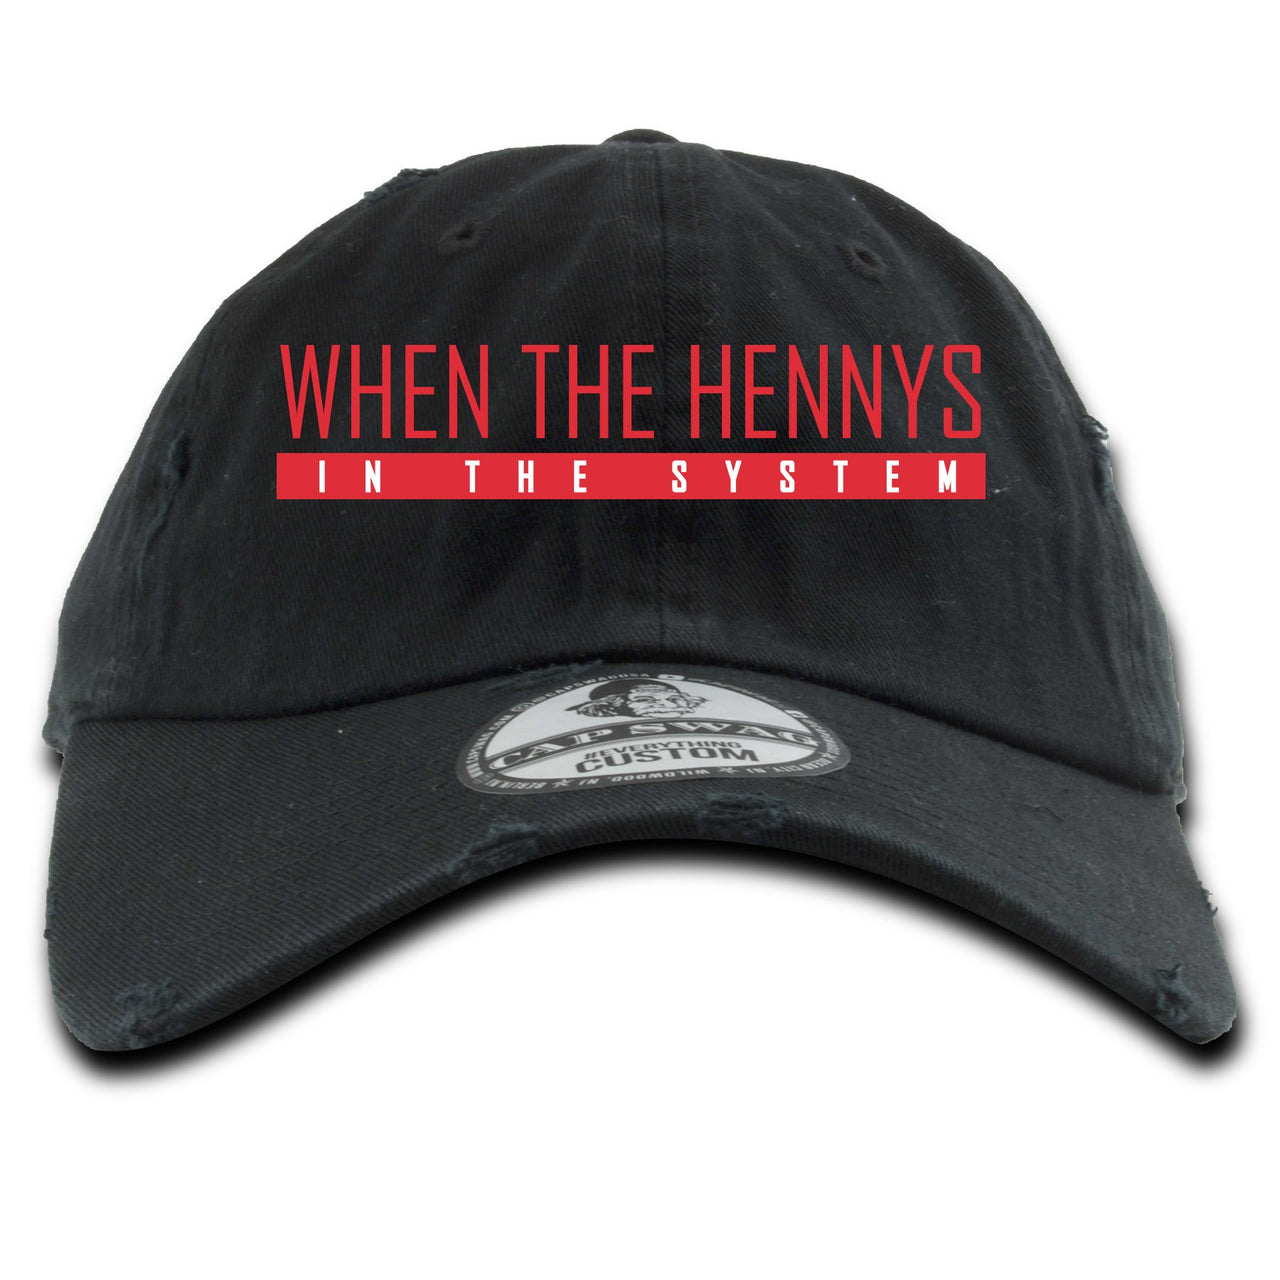 Bred 2019 4s Distressed Dad Hat | When the Hennys, Black